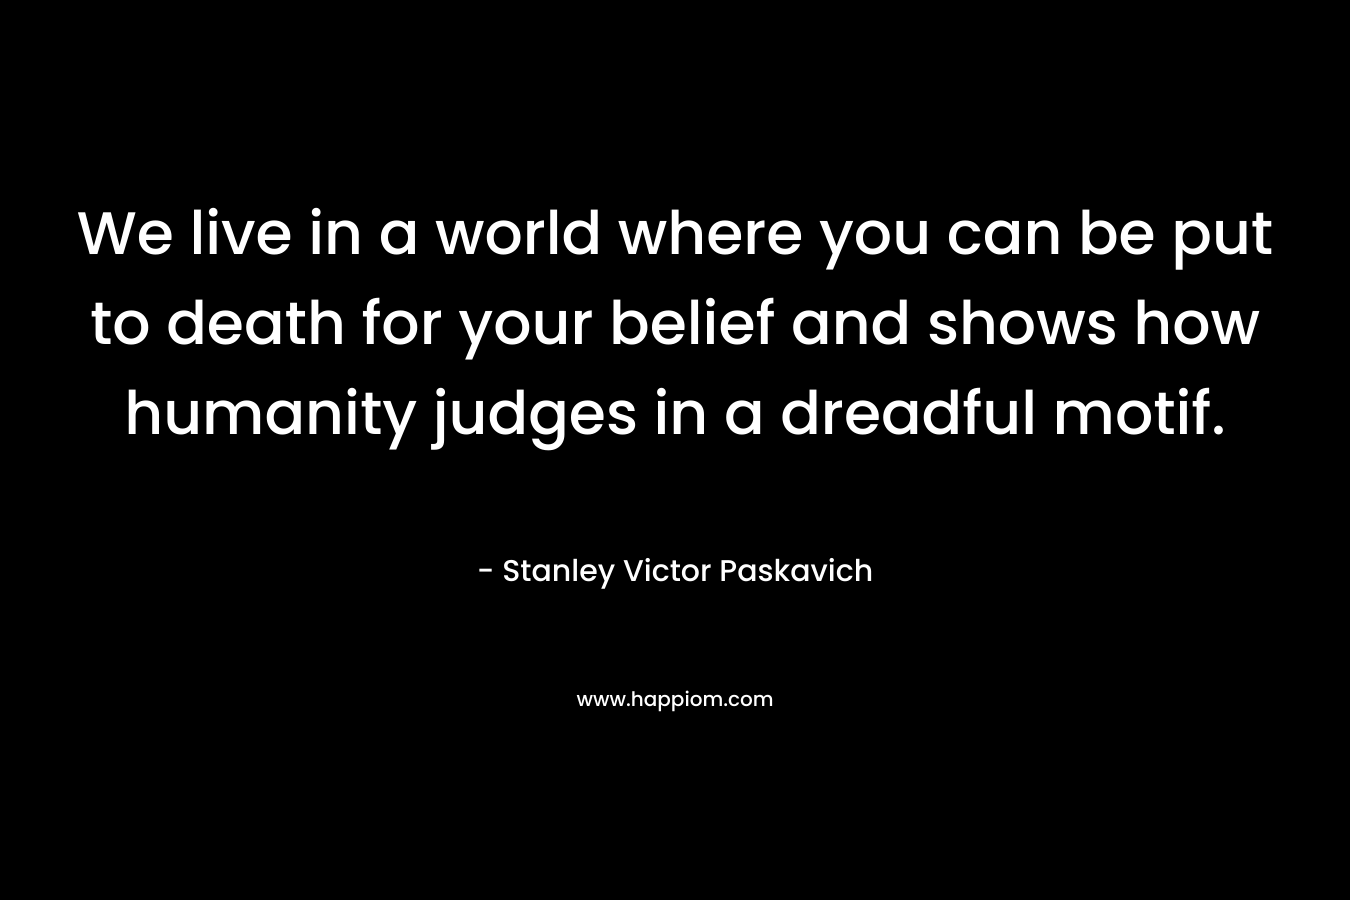 We live in a world where you can be put to death for your belief and shows how humanity judges in a dreadful motif. – Stanley Victor Paskavich